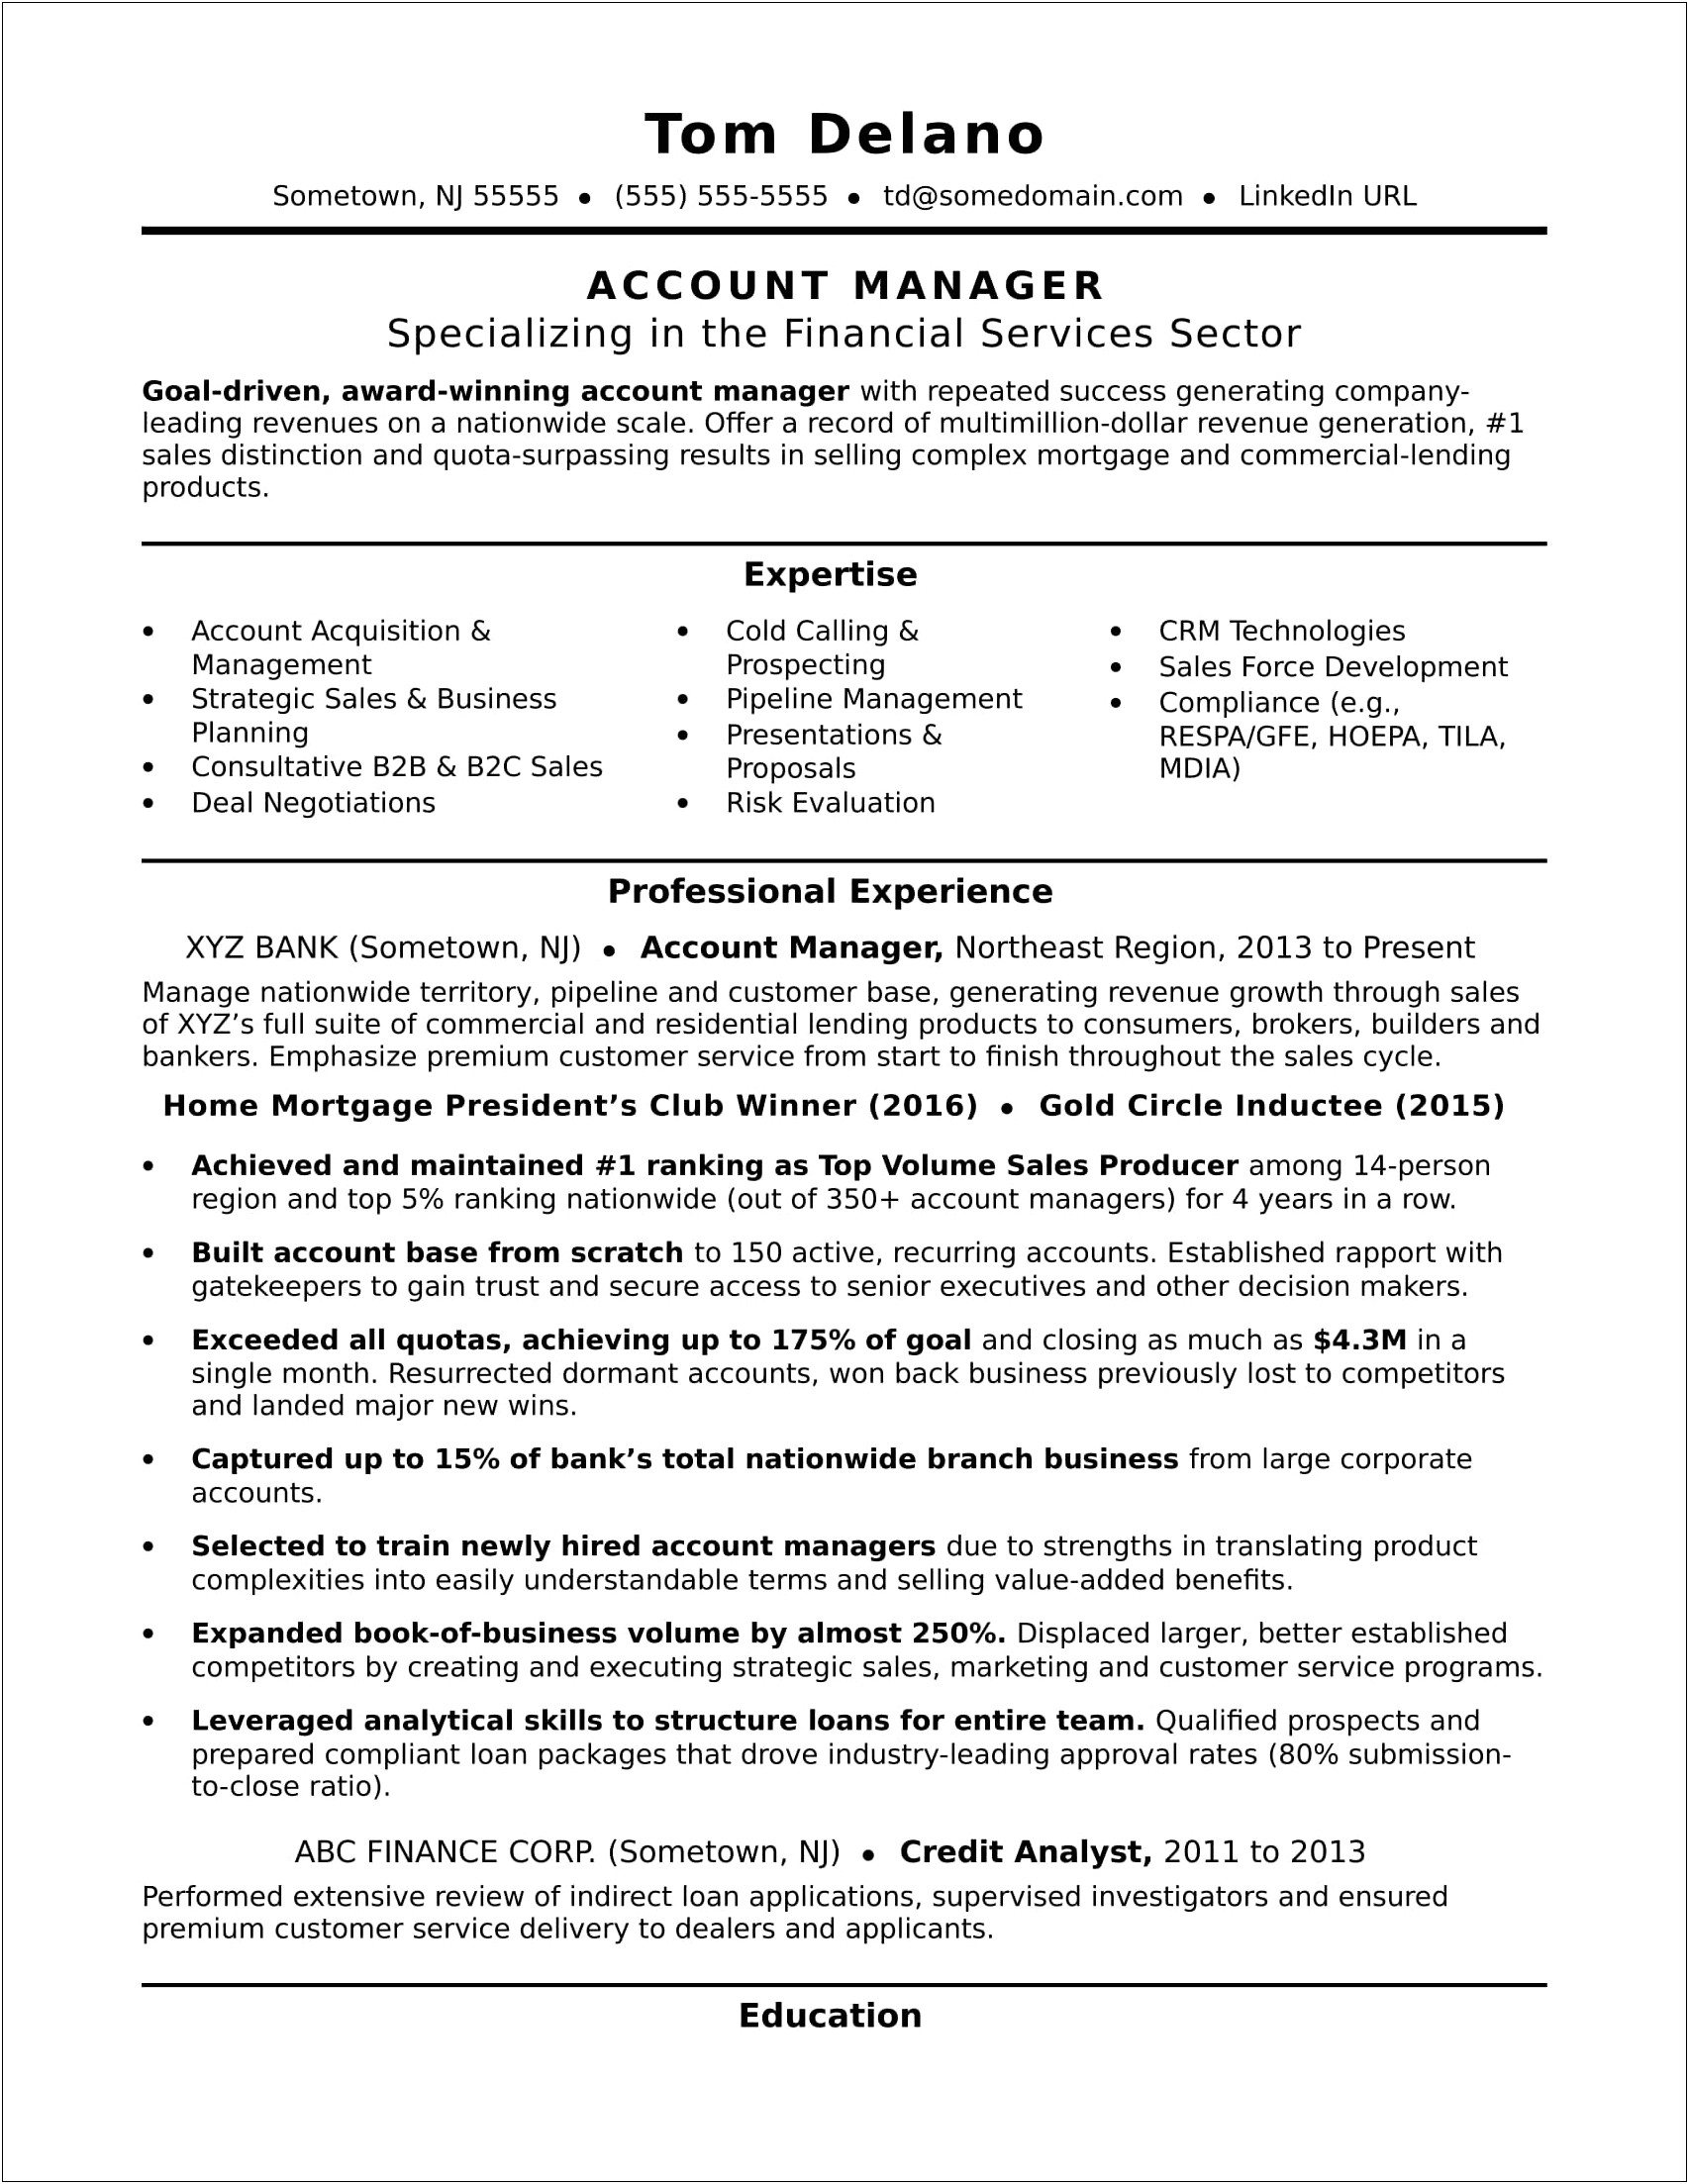 Resume Objective For Account Executive Position